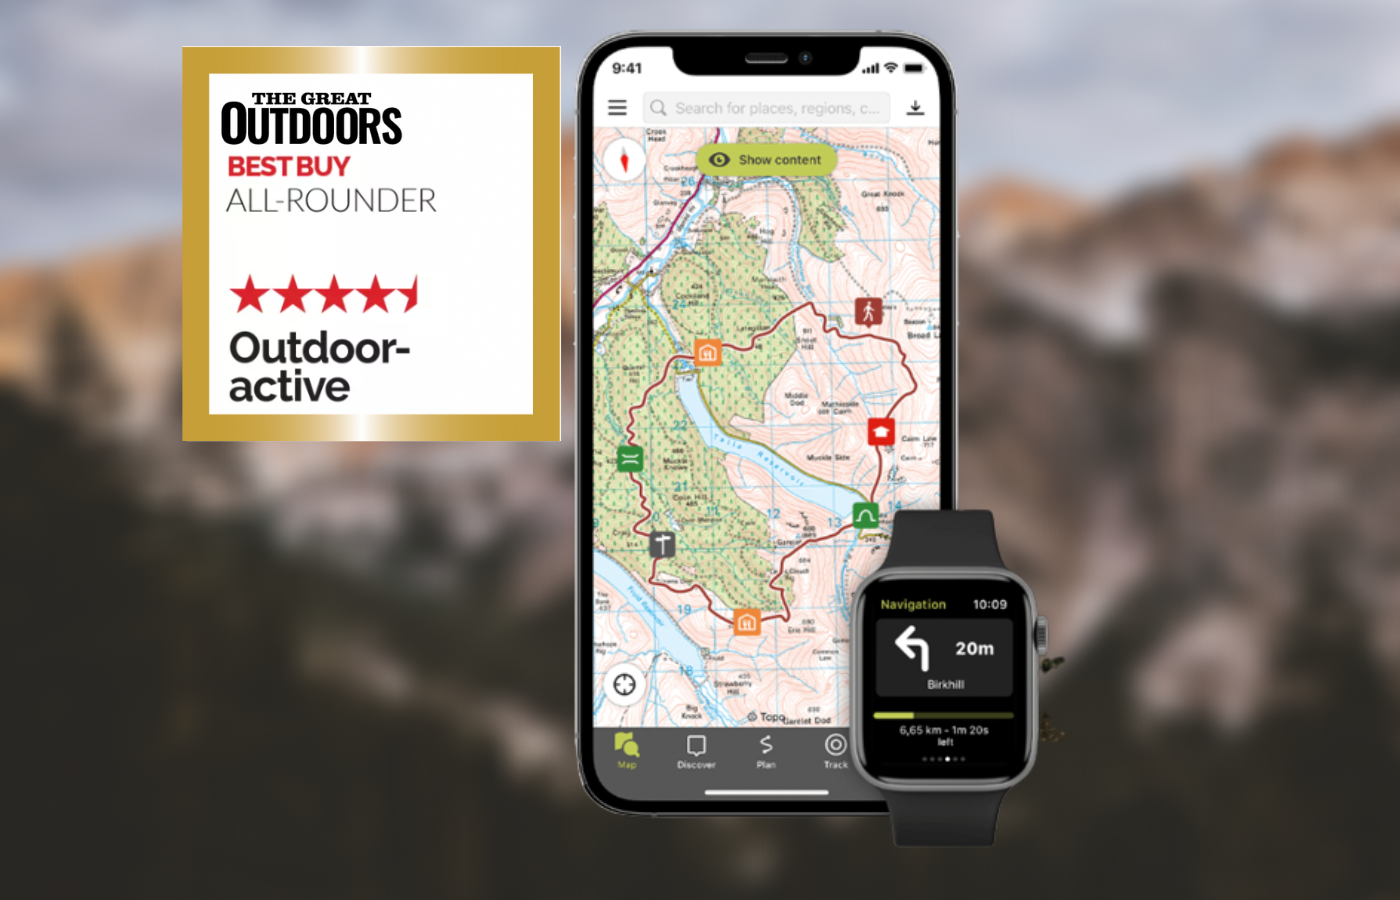 Screenshots of the Outdoor active app and rating score given